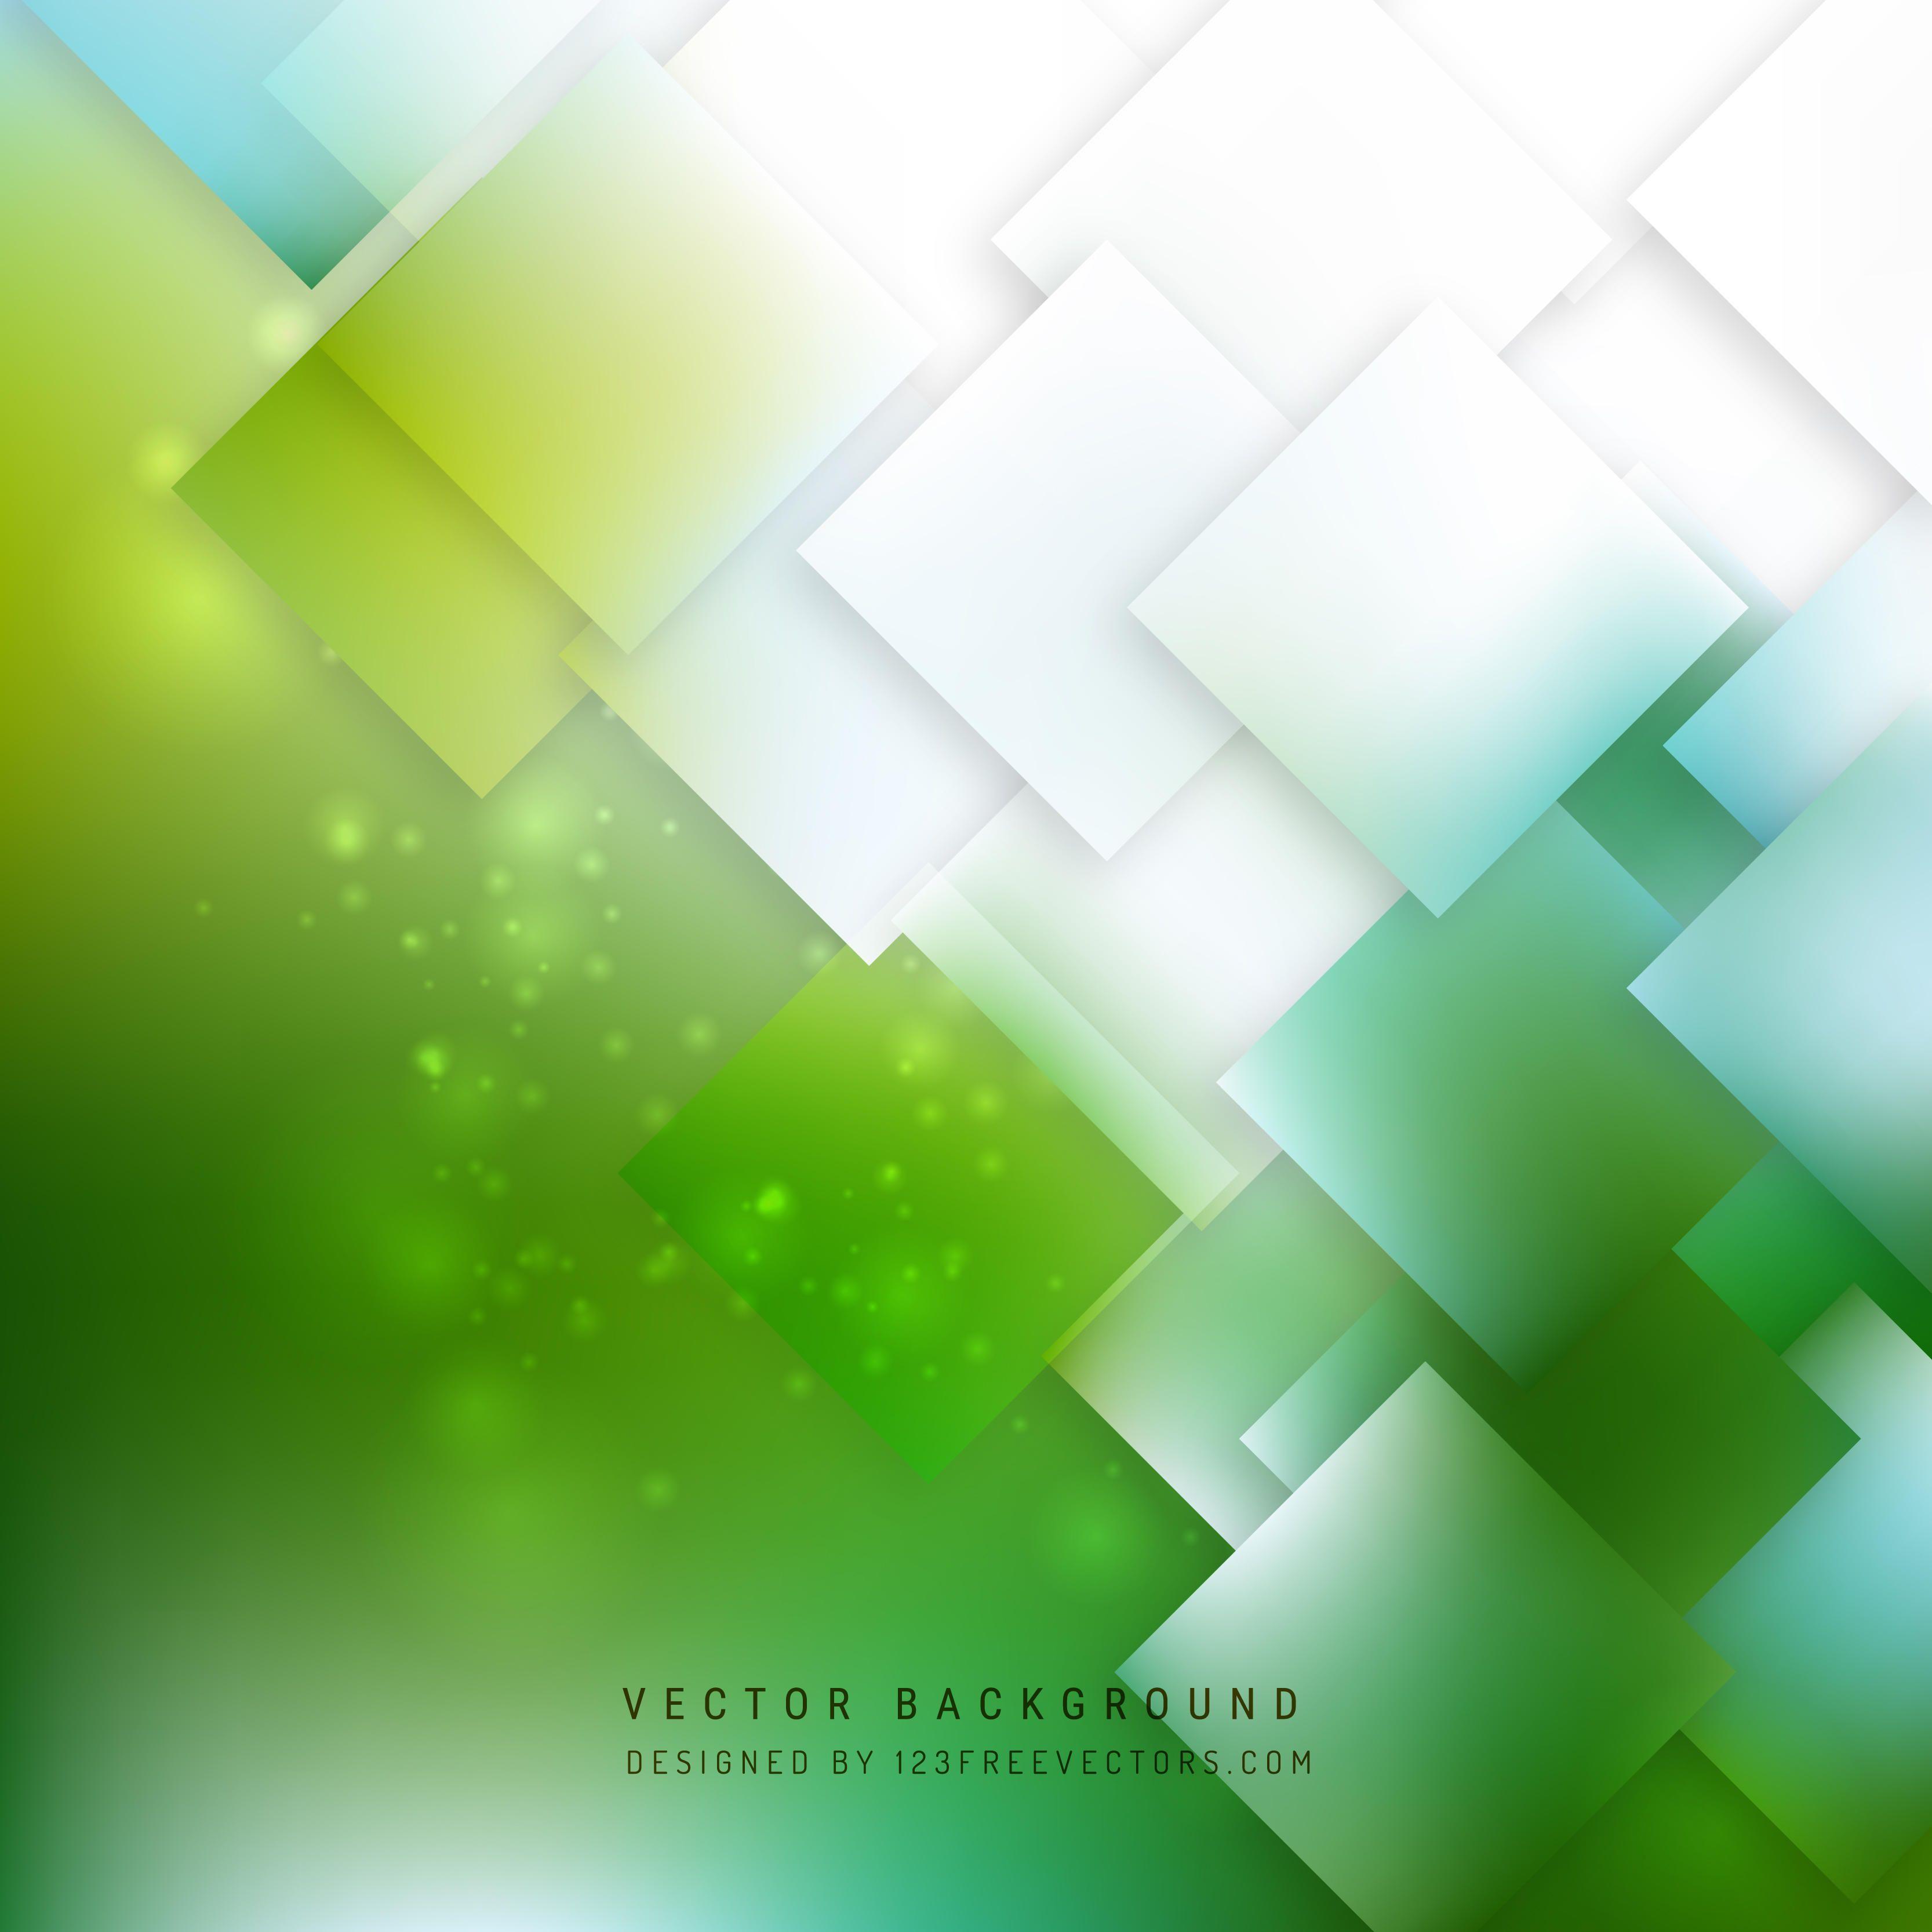 Blue and Green Background Vectors. Download Free Vector Art